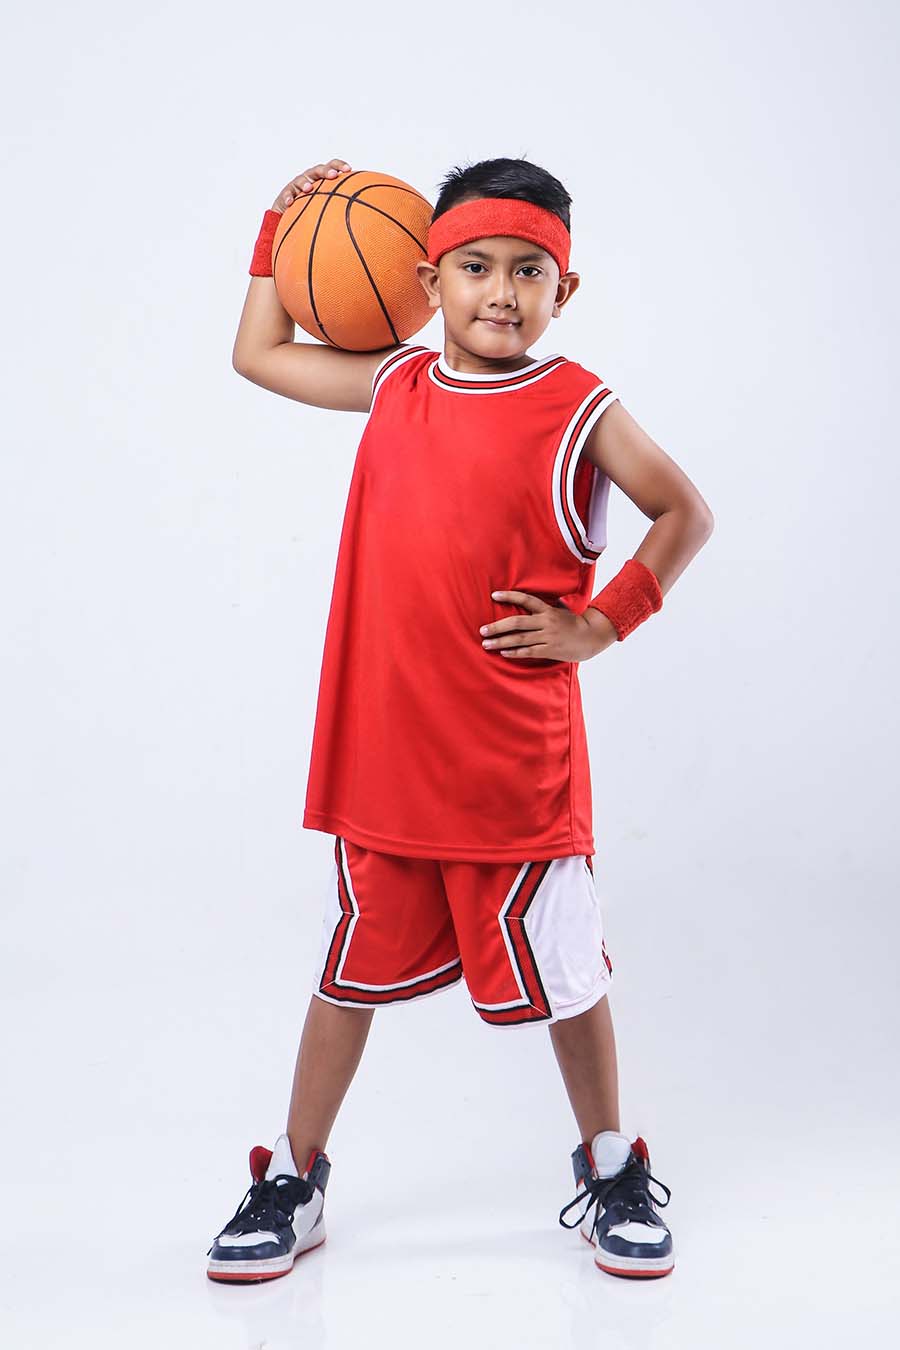 Fun Basketball Math Facts for Kids kid ready to play basketball